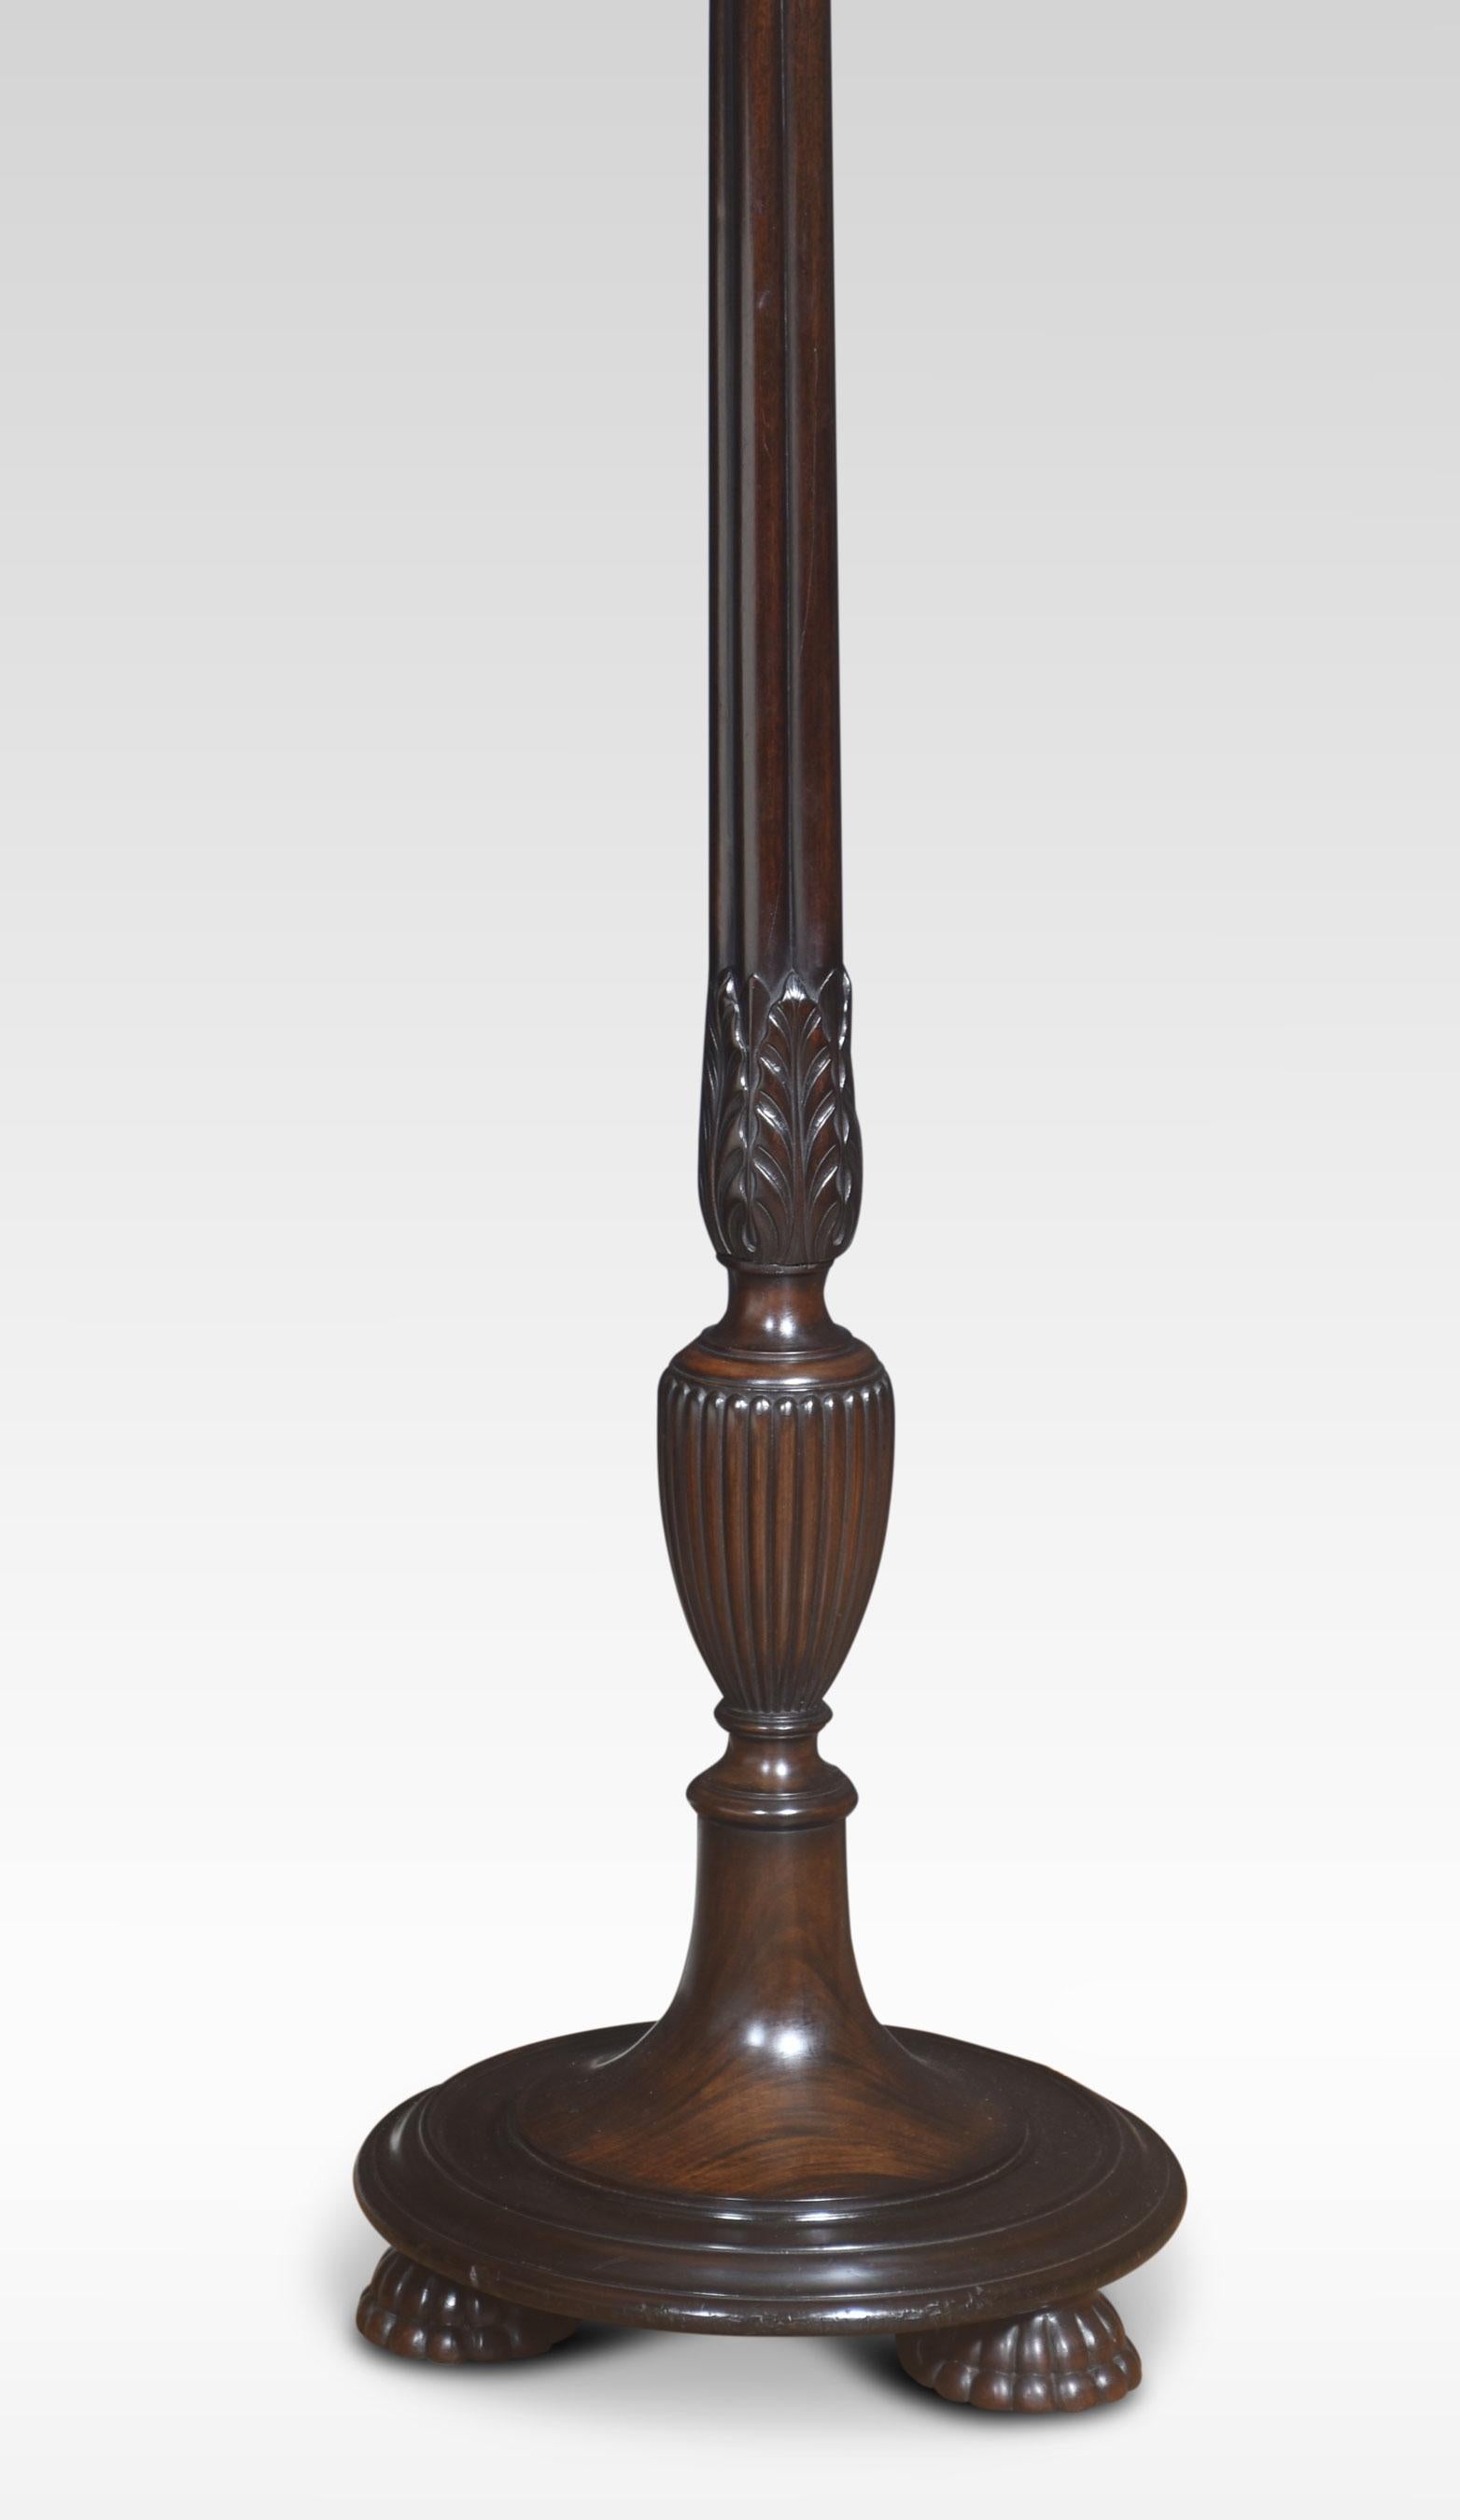 Near pair of standard lamps, the carved mahogany tapered column with acanthus and reeded decoration. All raised up on a circular base terminating in paw feet.
Dimensions
Height 64 Inches
Width 15 Inches
Depth 15 Inches